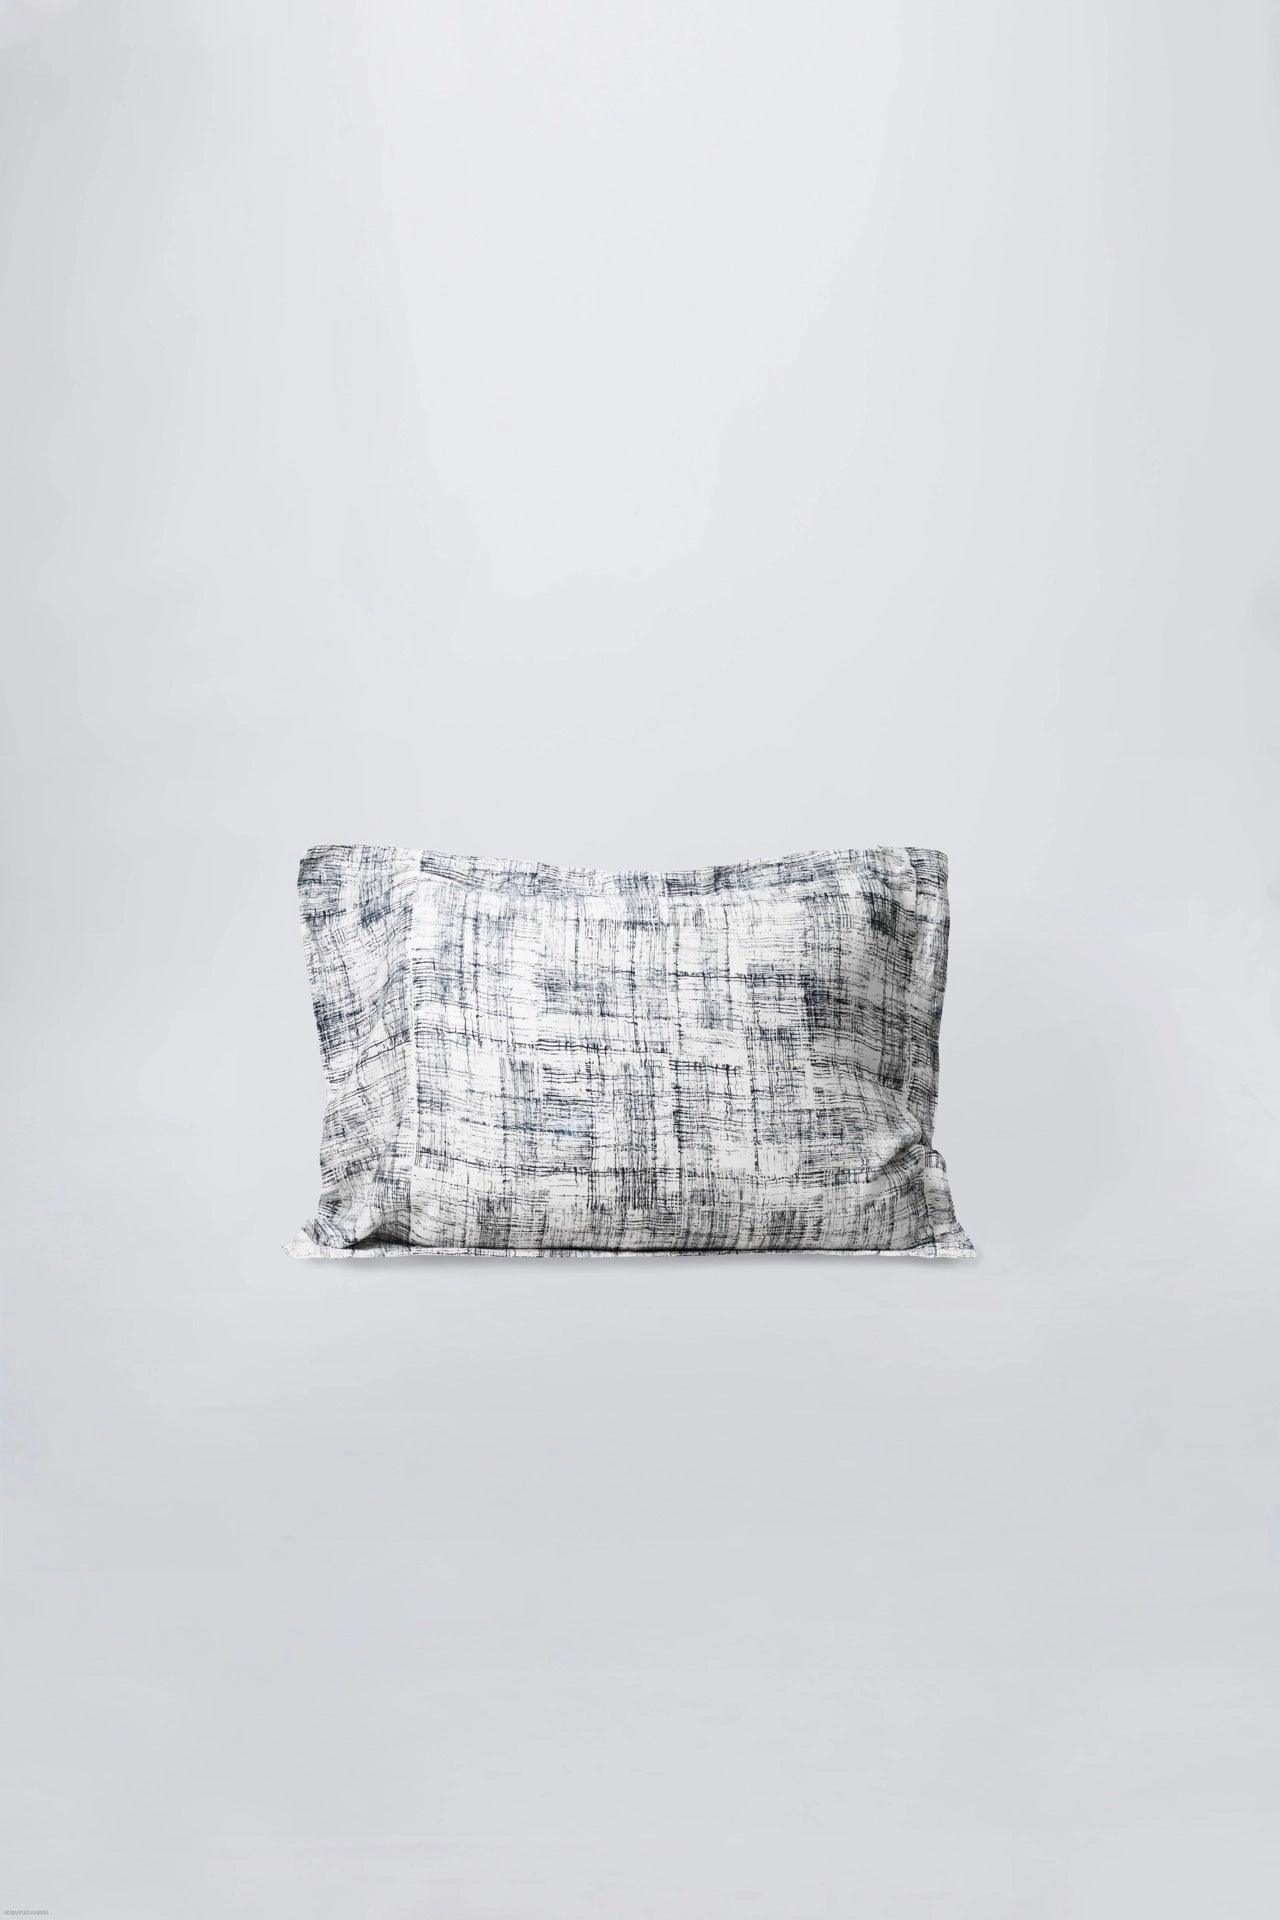 Abstract Line Drawing Print Duvet Set - NOT LABELED